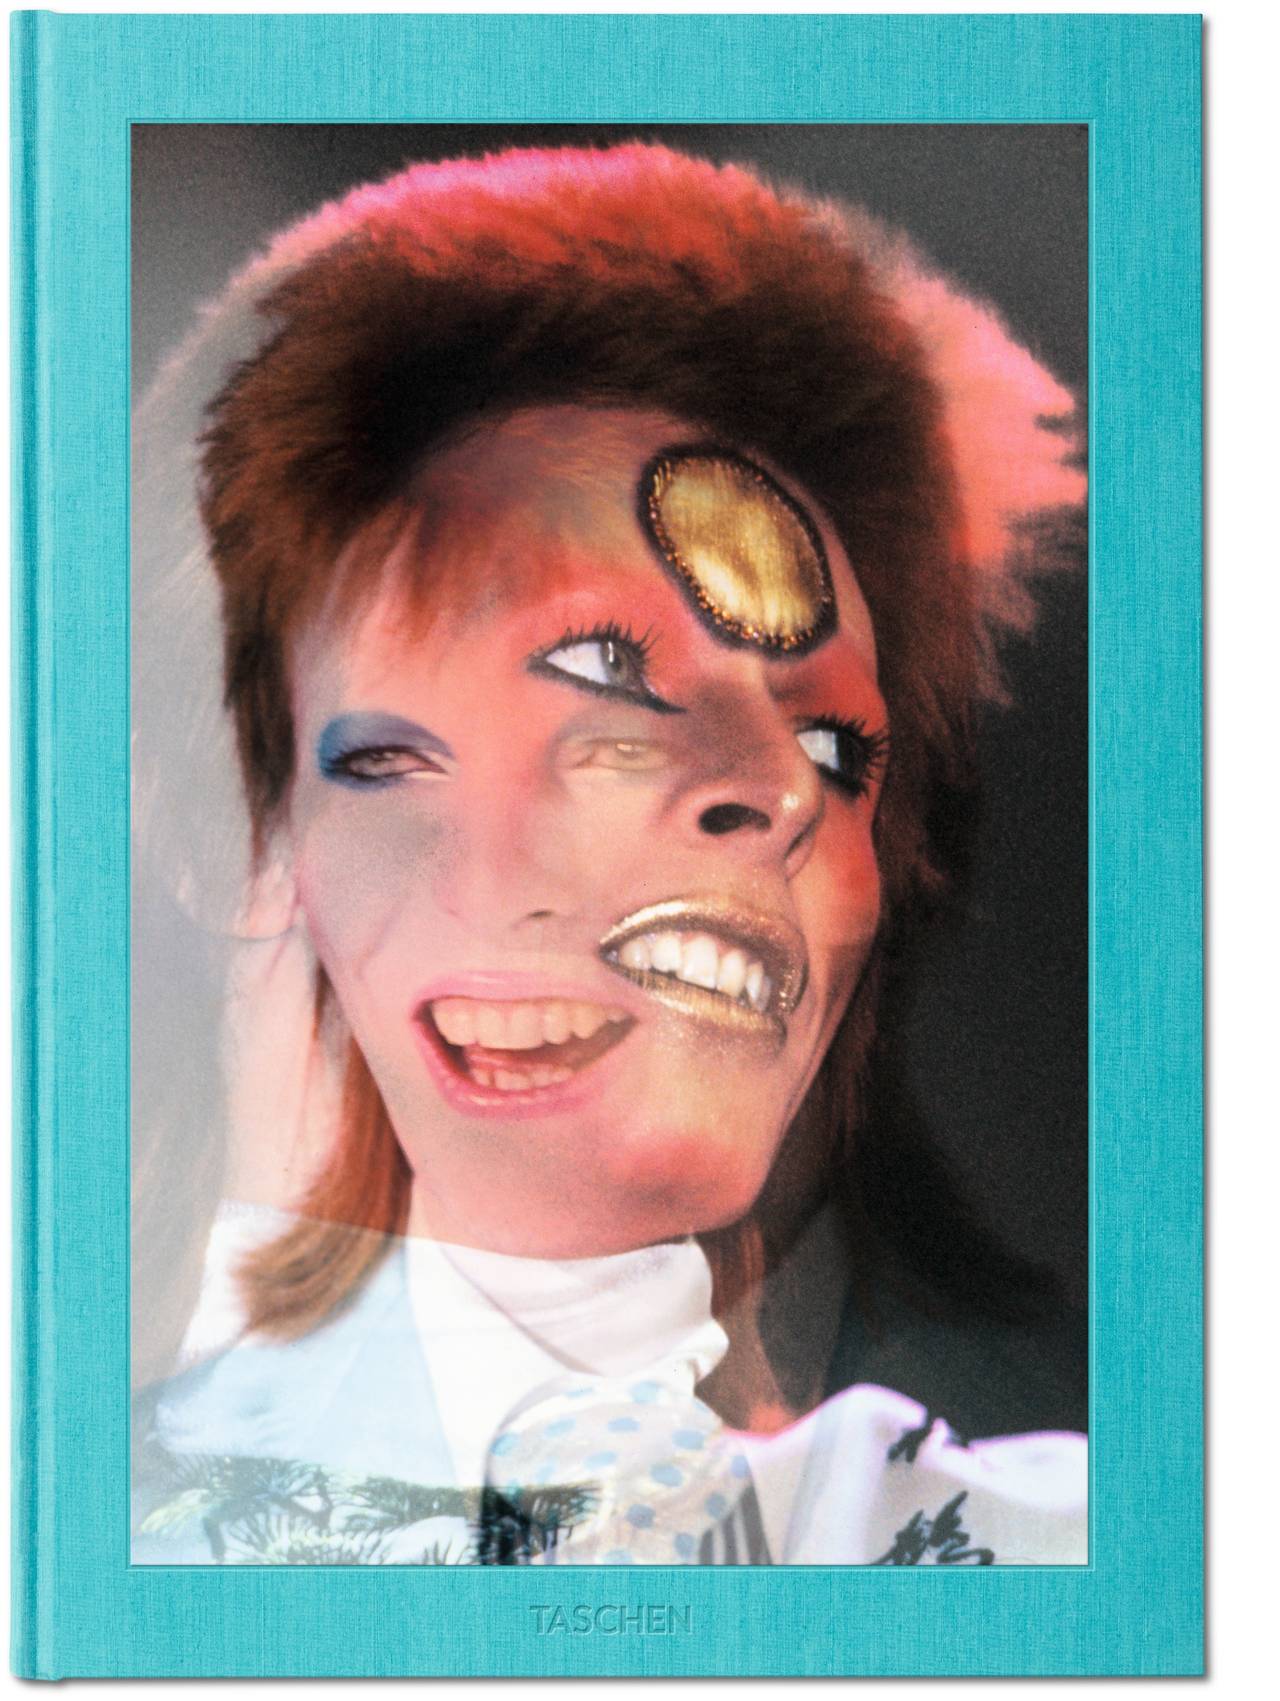 The Rise of David Bowie. 1972-1973. Art Edition B - Photograph by Mick Rock